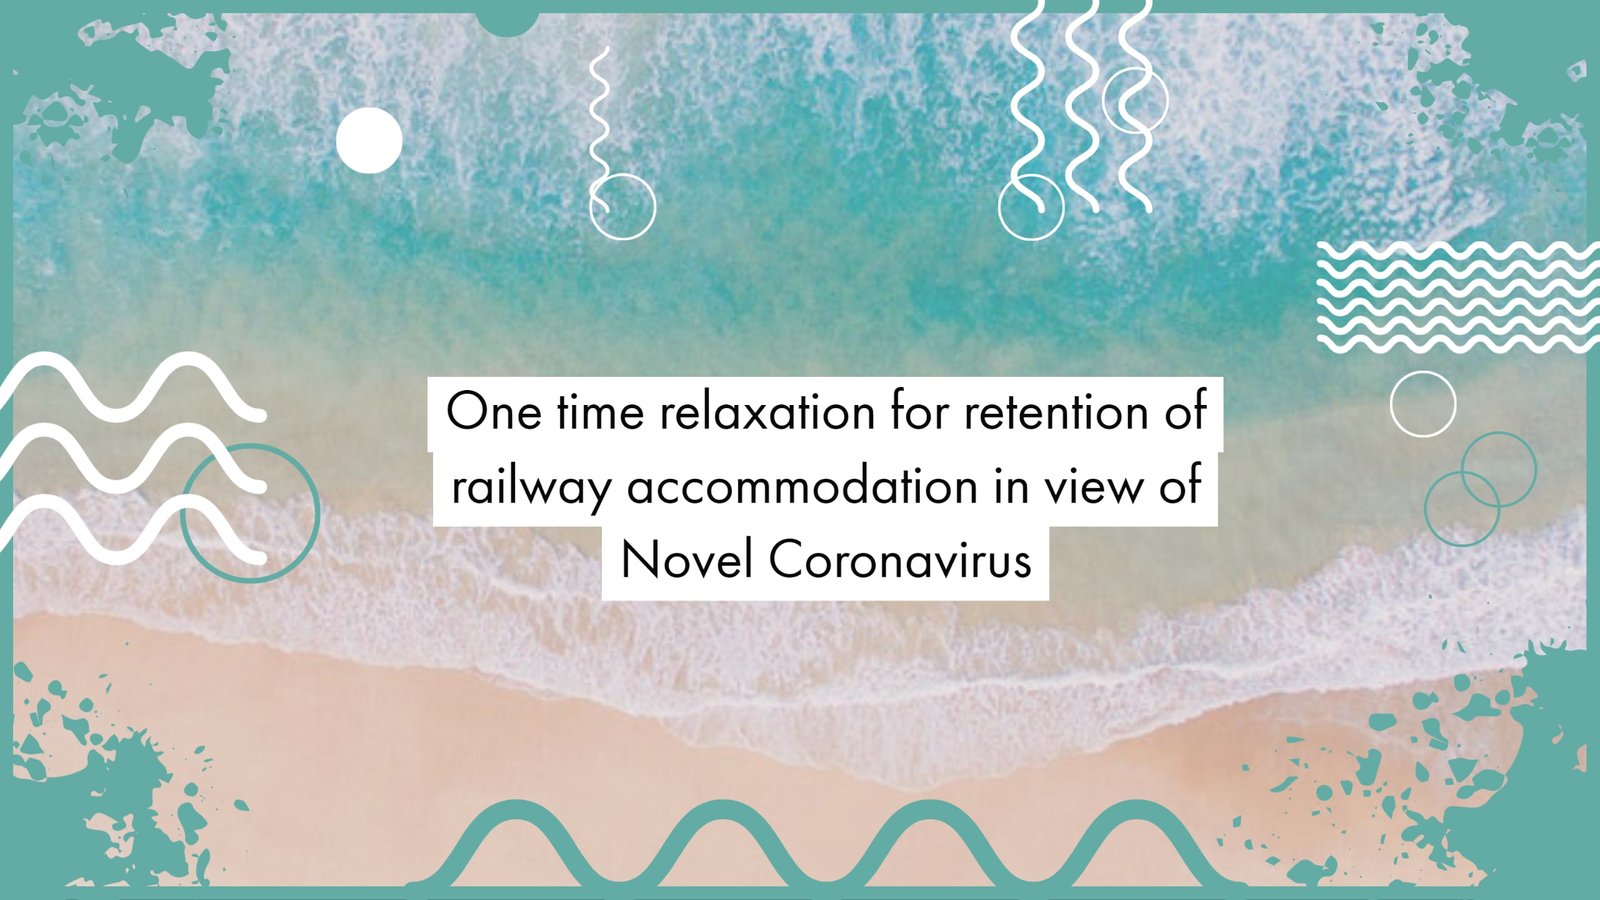 One time relaxation for retention of railway accommodation in view of Novel Coronavirus